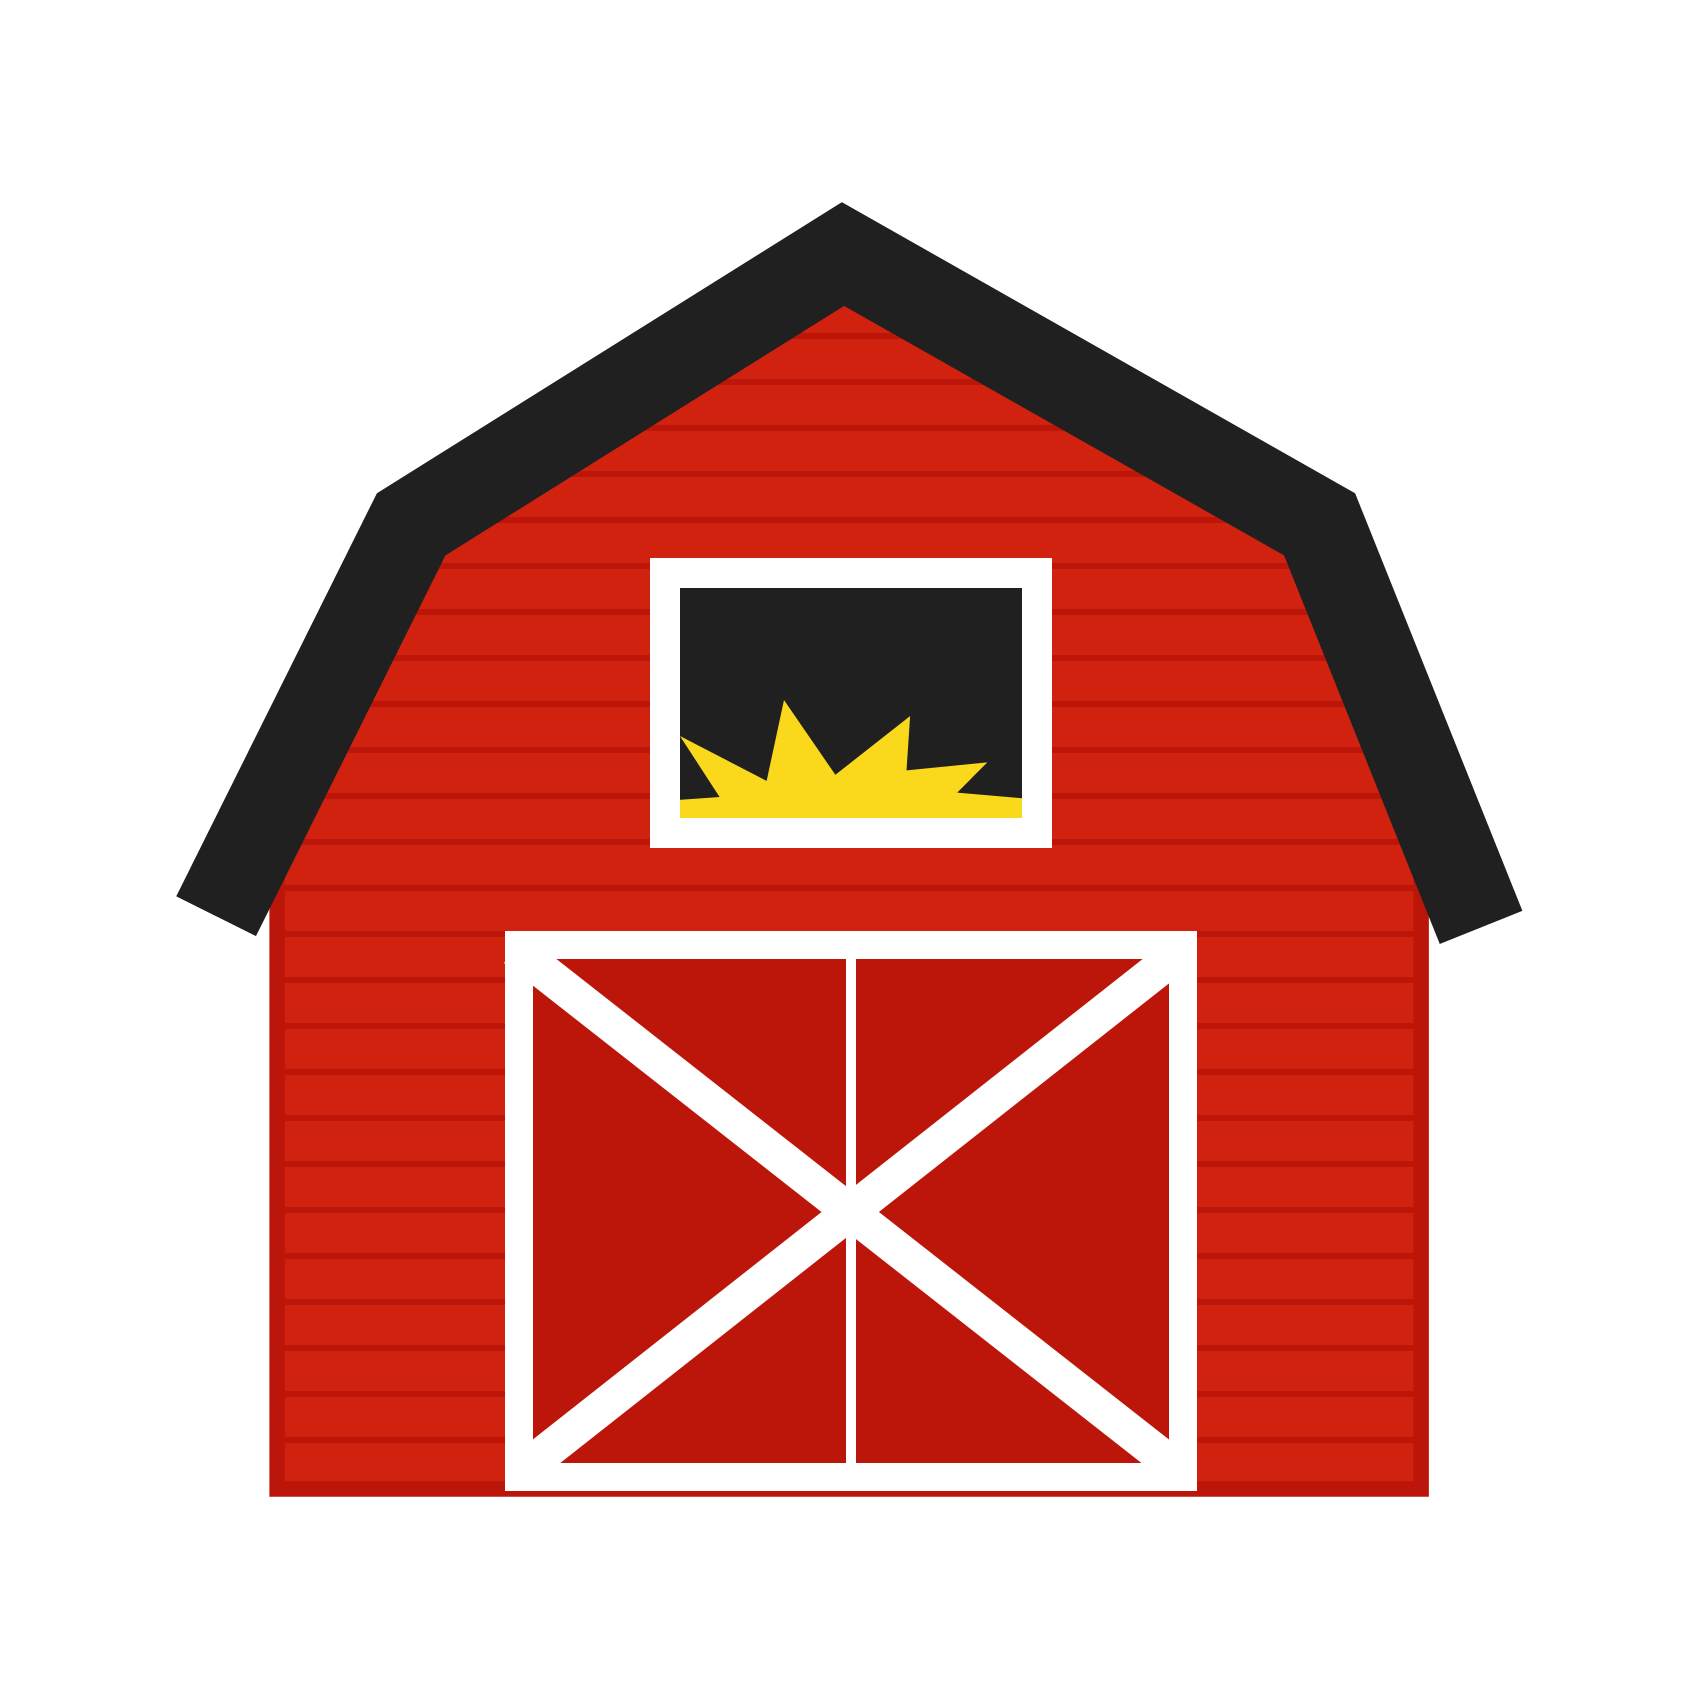 Red Barn Clipart - ClipArt Best